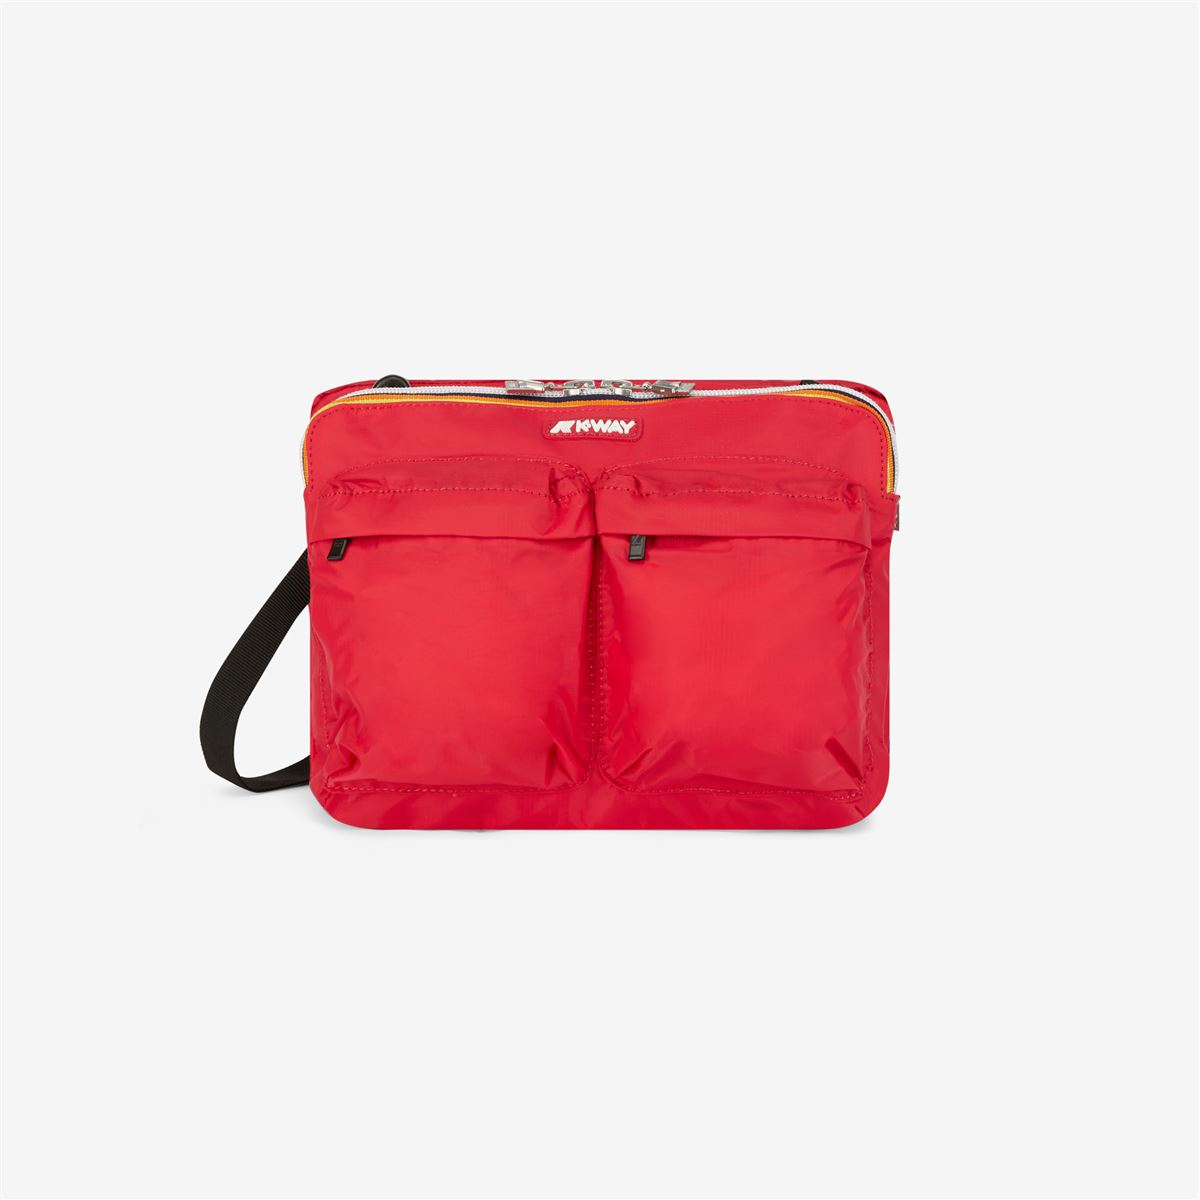 FLERS - BAG - UNISEX - RED BERRY